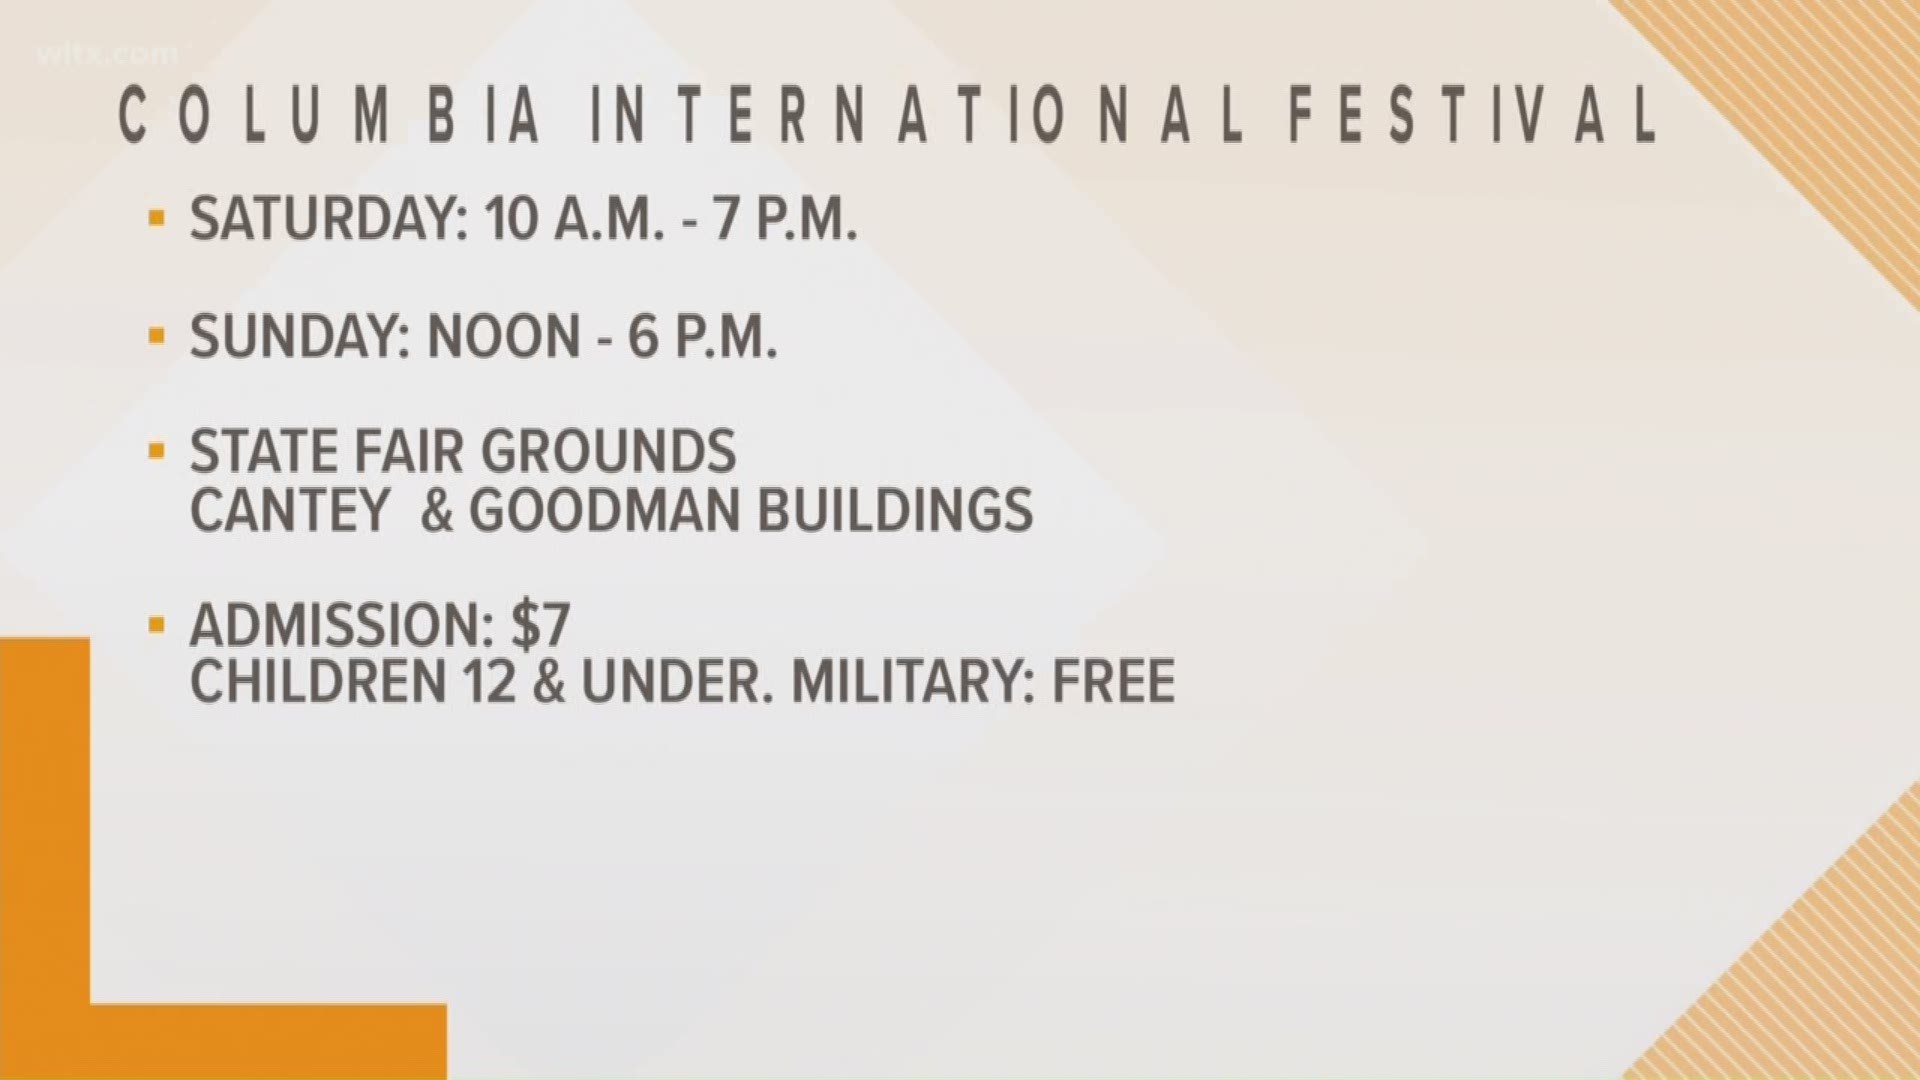 The 24th annual Columbia International Festival will be held April 6-7, 2019 at the State Fairgrounds.